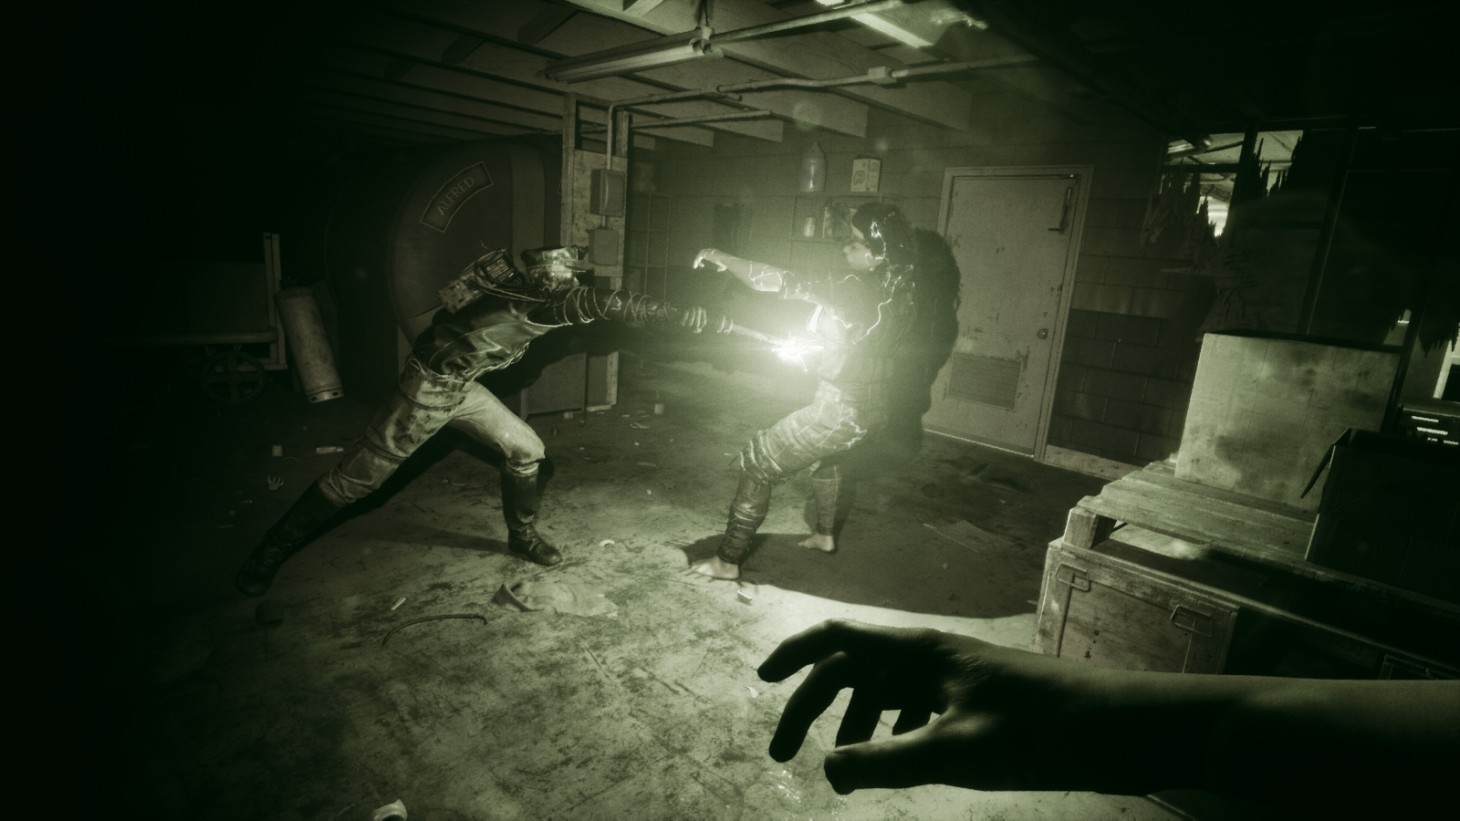 The Outlast Trials gets new gameplay trailer and delayed release date